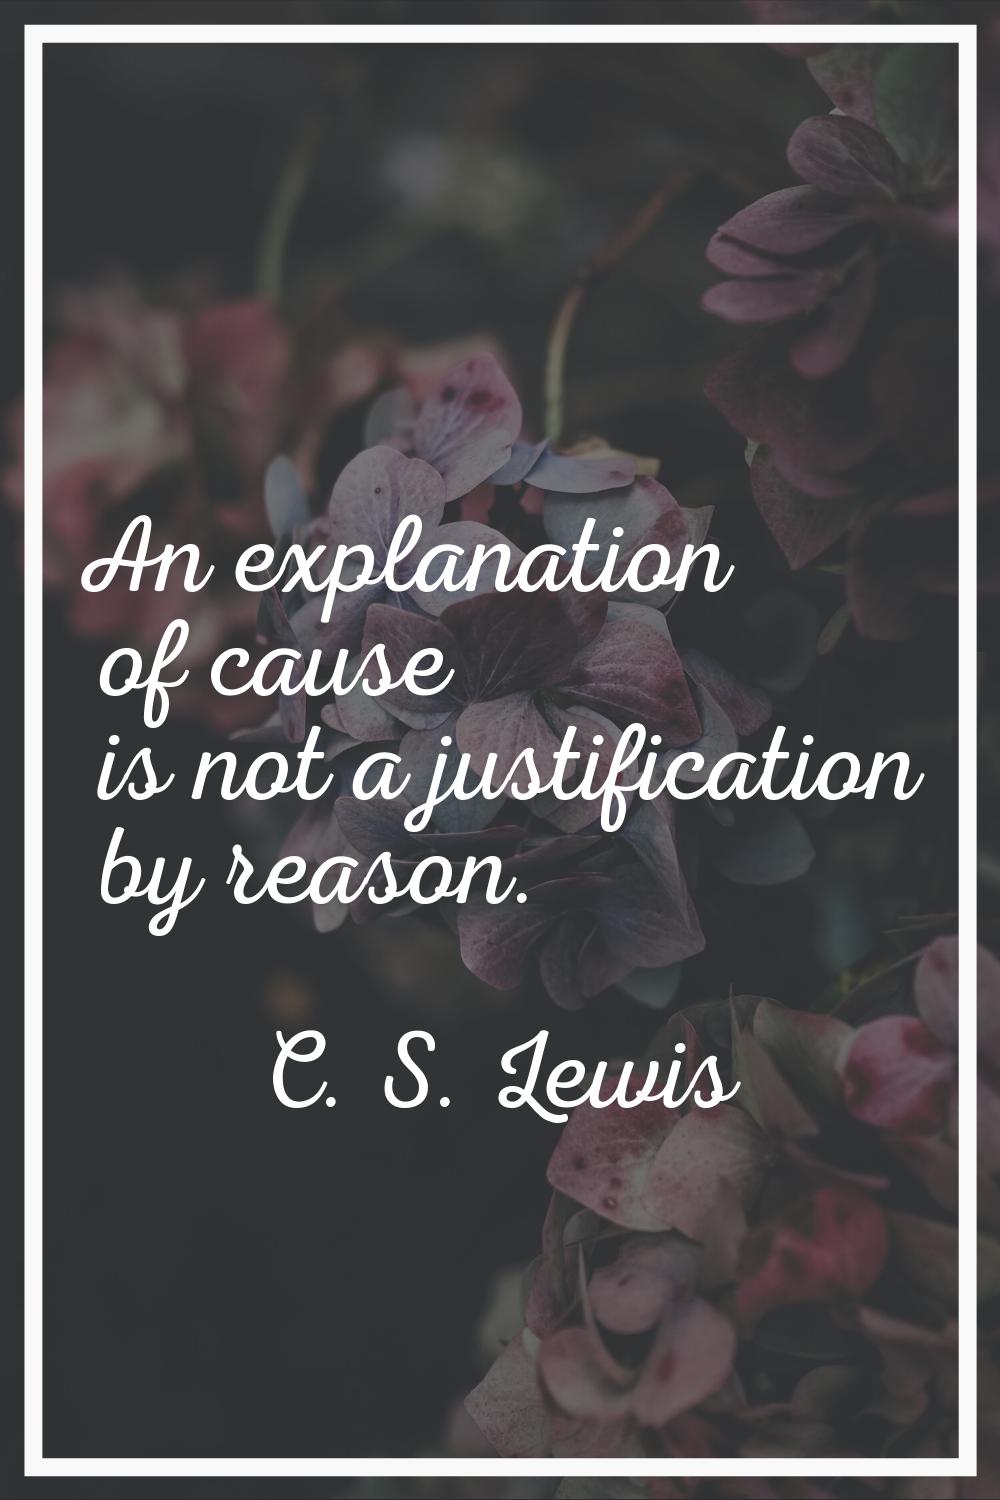 An explanation of cause is not a justification by reason.